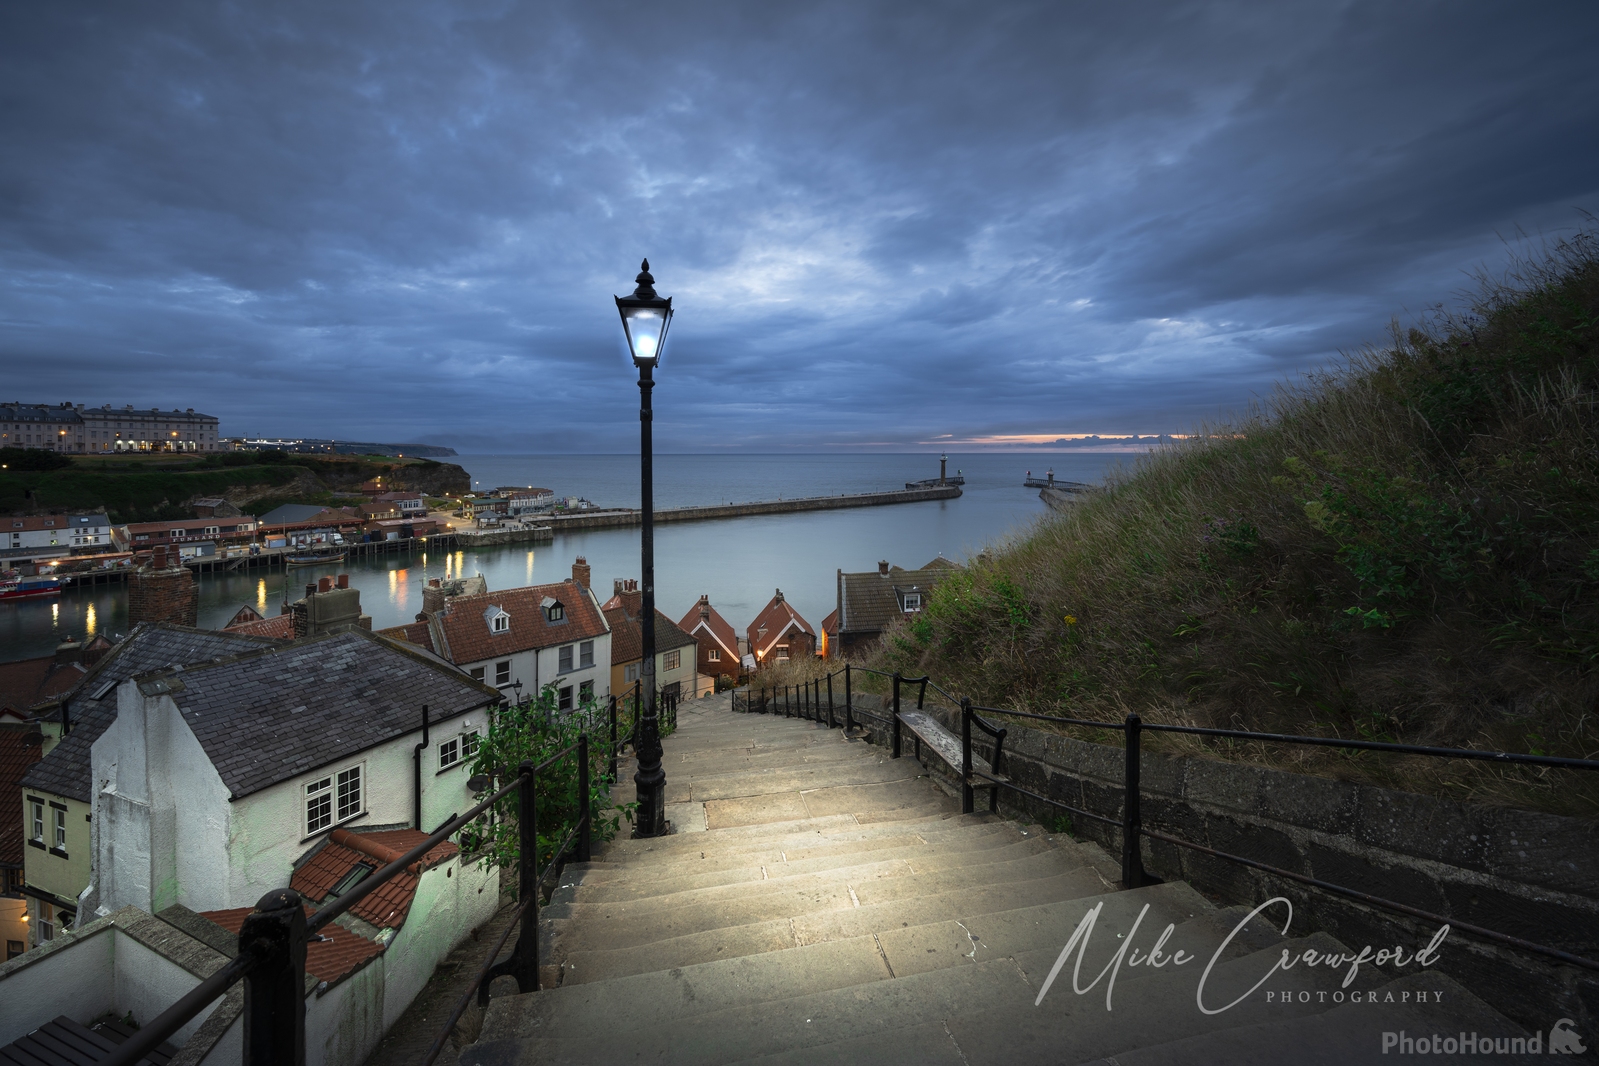 Image of Whitby 199 Steps by mick crawford